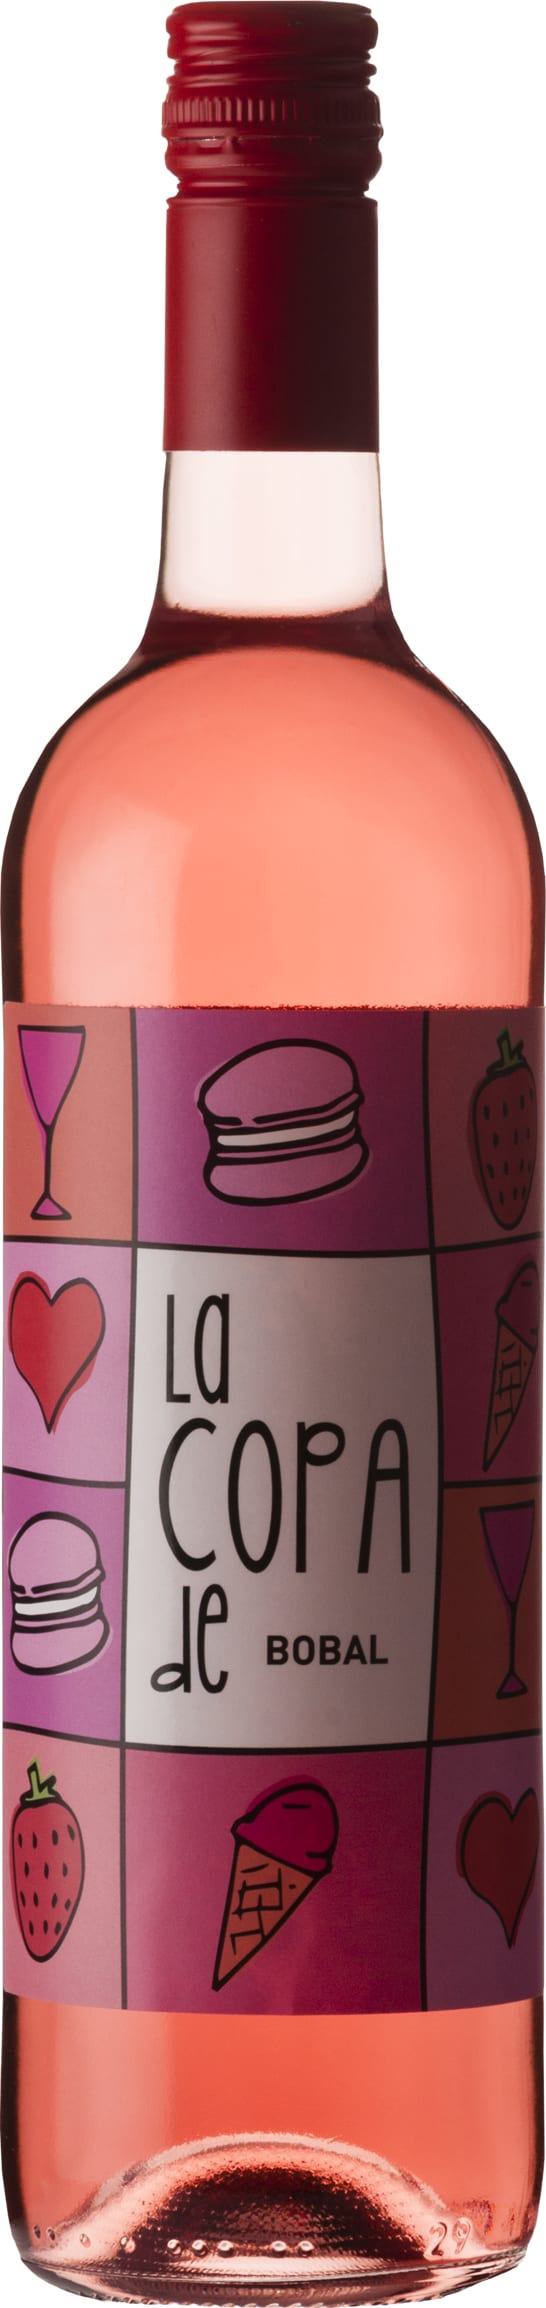 Bodegas Covinas La Copa de Bobal Rose 2020 75cl - Buy Bodegas Covinas Wines from GREAT WINES DIRECT wine shop